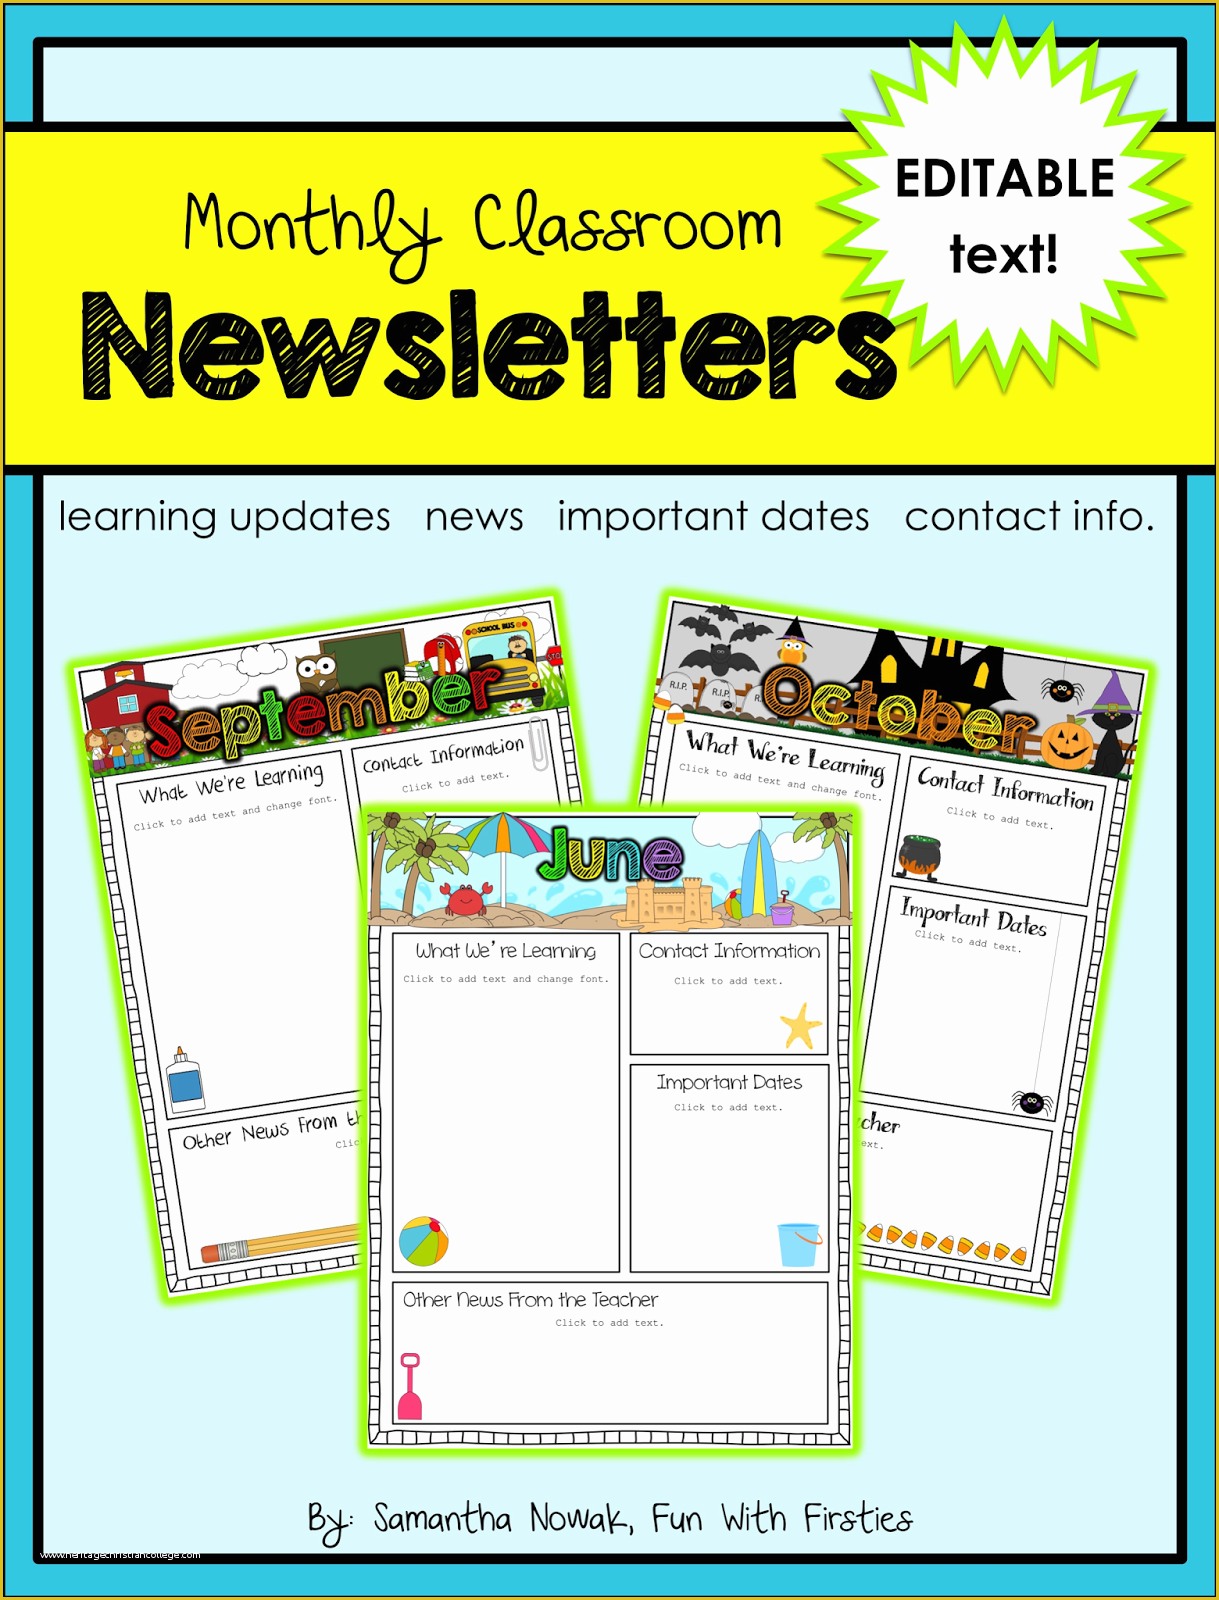 Free Editable Newsletter Templates Of Fun with Firsties Best Of Back to School